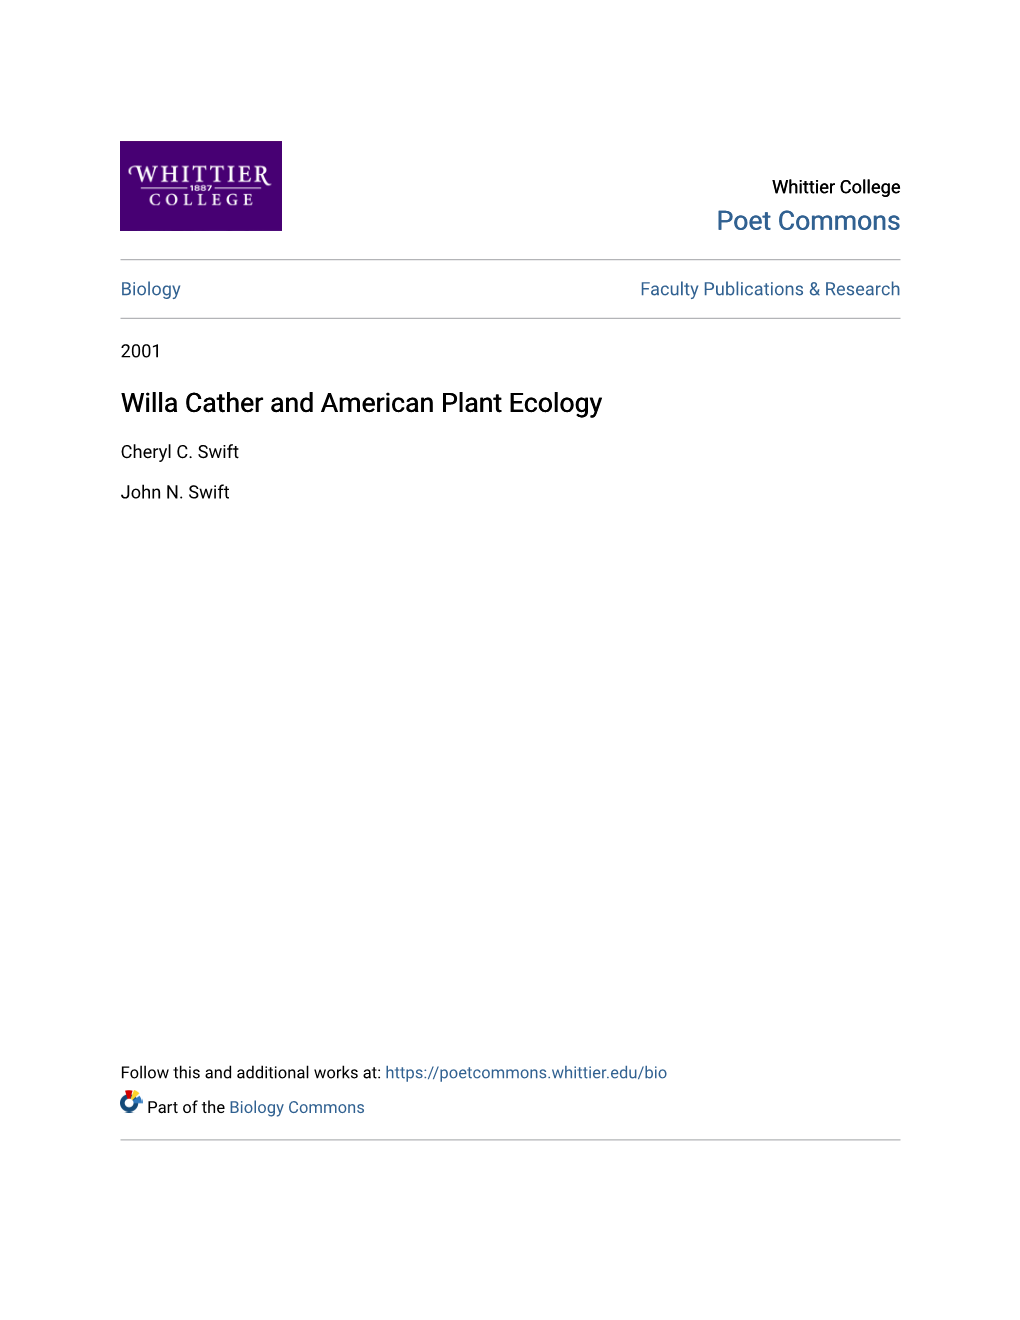 Willa Cather and American Plant Ecology